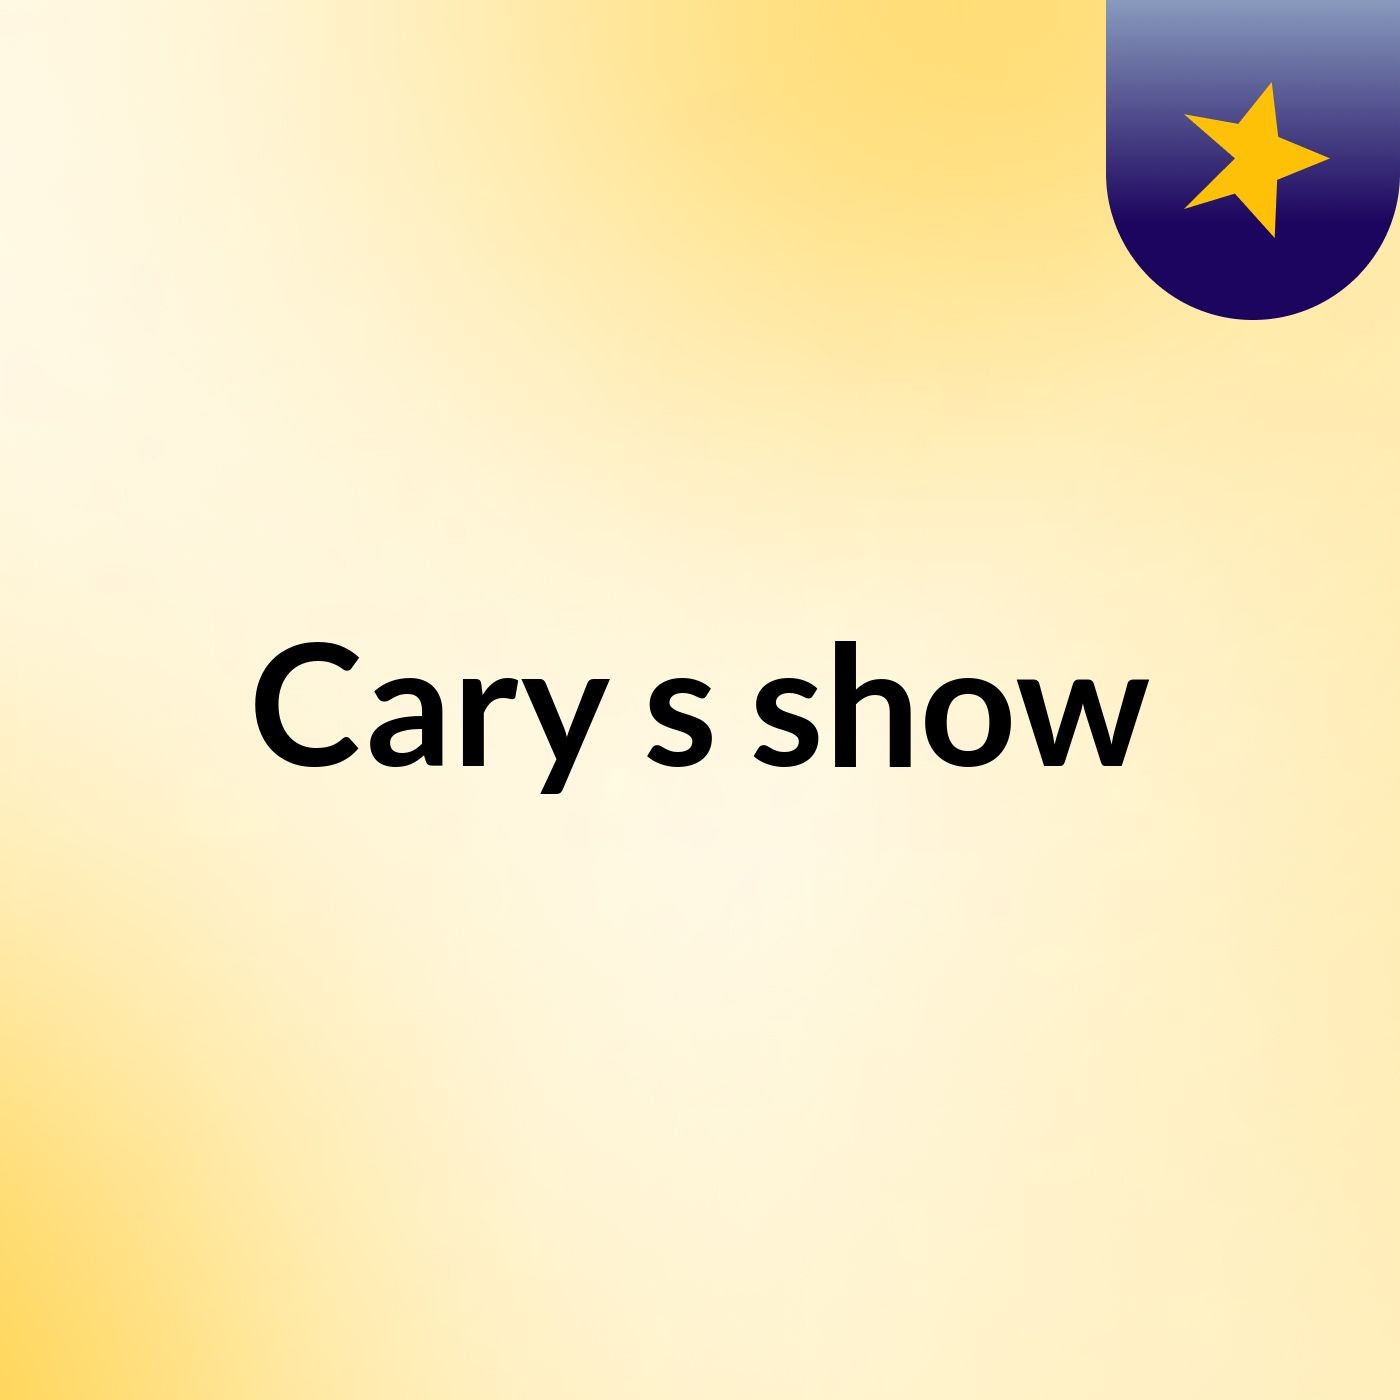 Cary's show